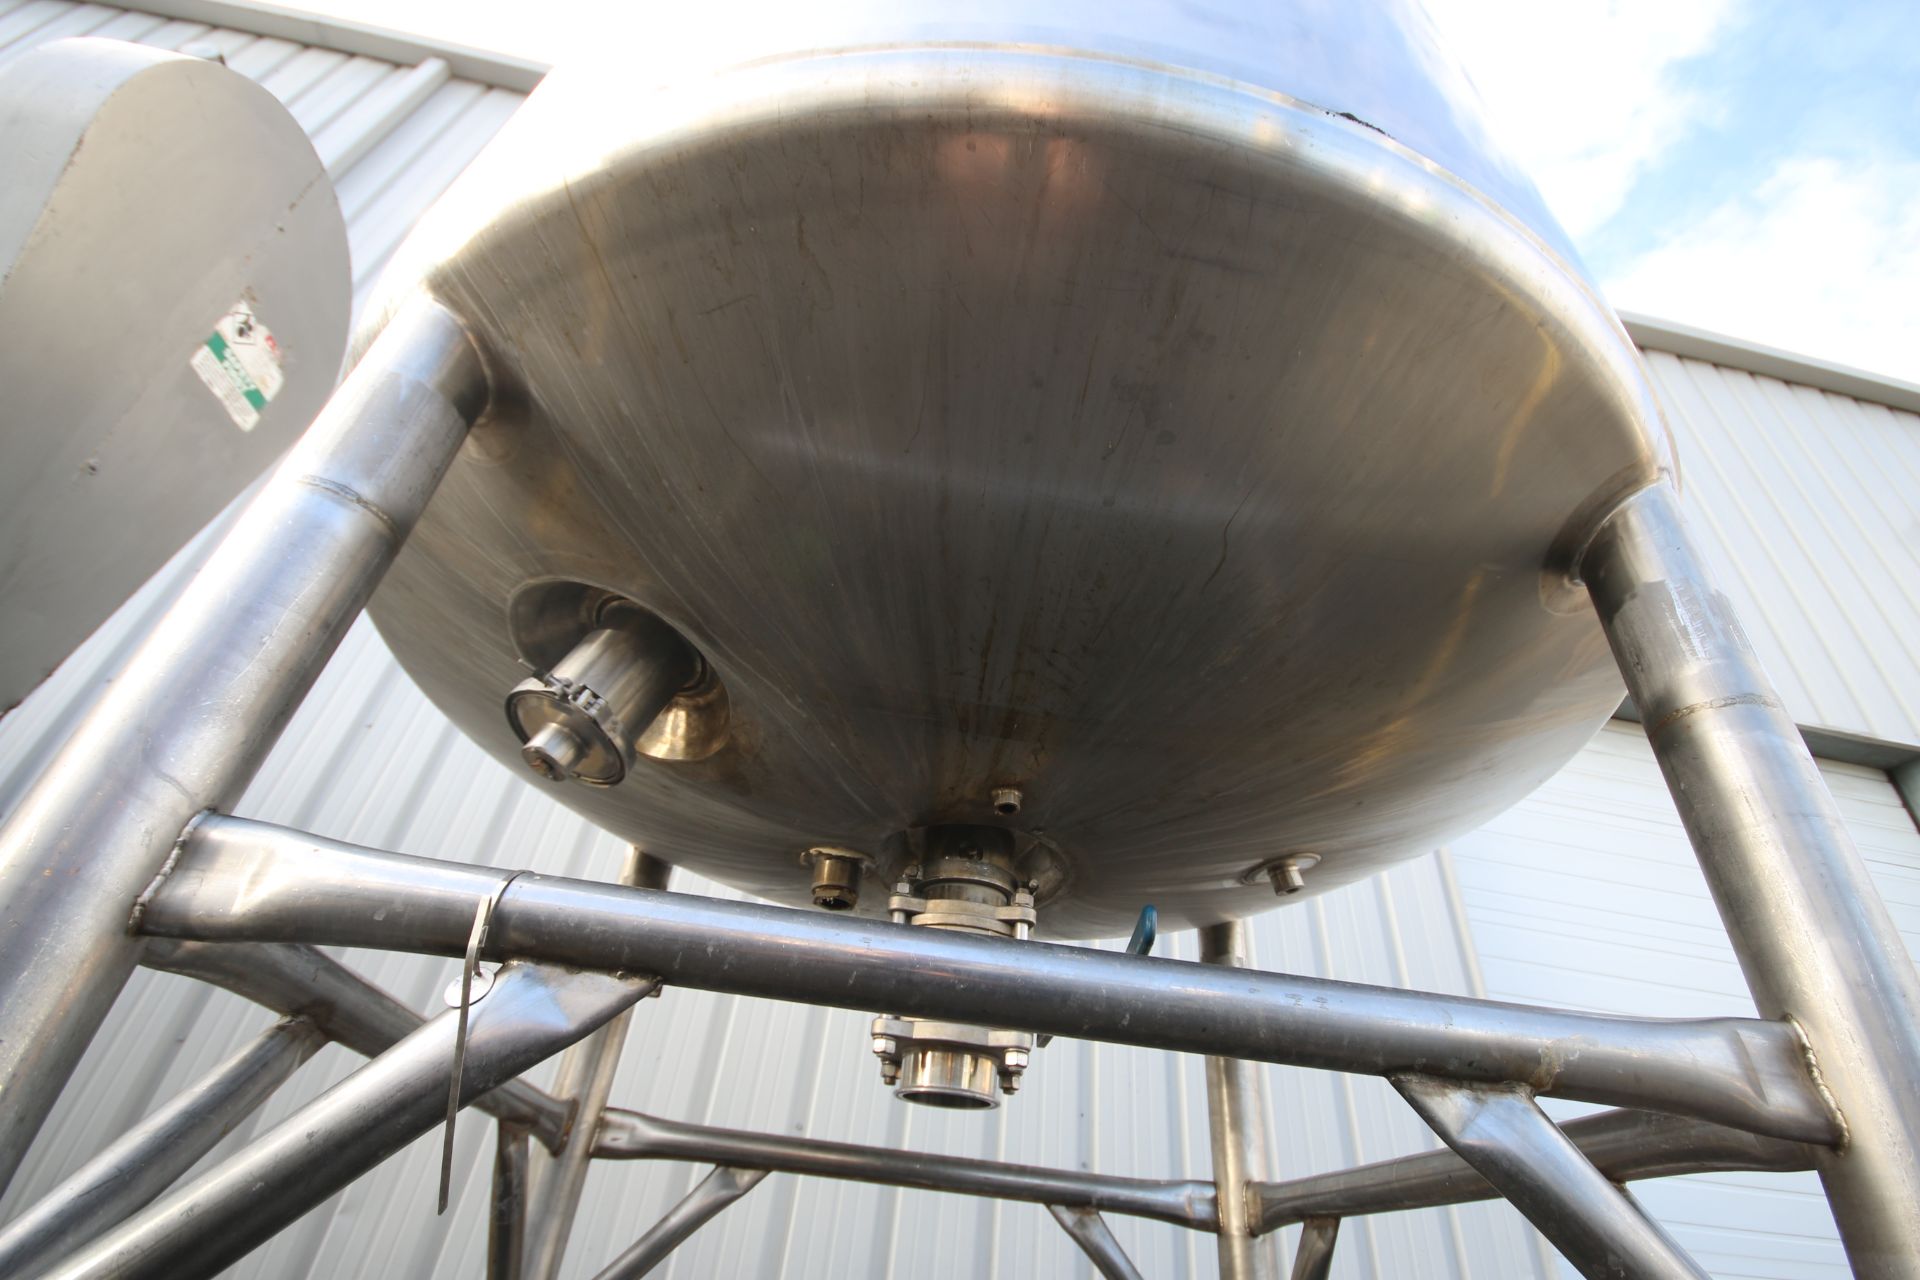 Precision Stainless Inc. 600 Gallon Dome Top Jacketed S/S Tank, S/N 6091-14, Lightnin Vertical - Image 8 of 10